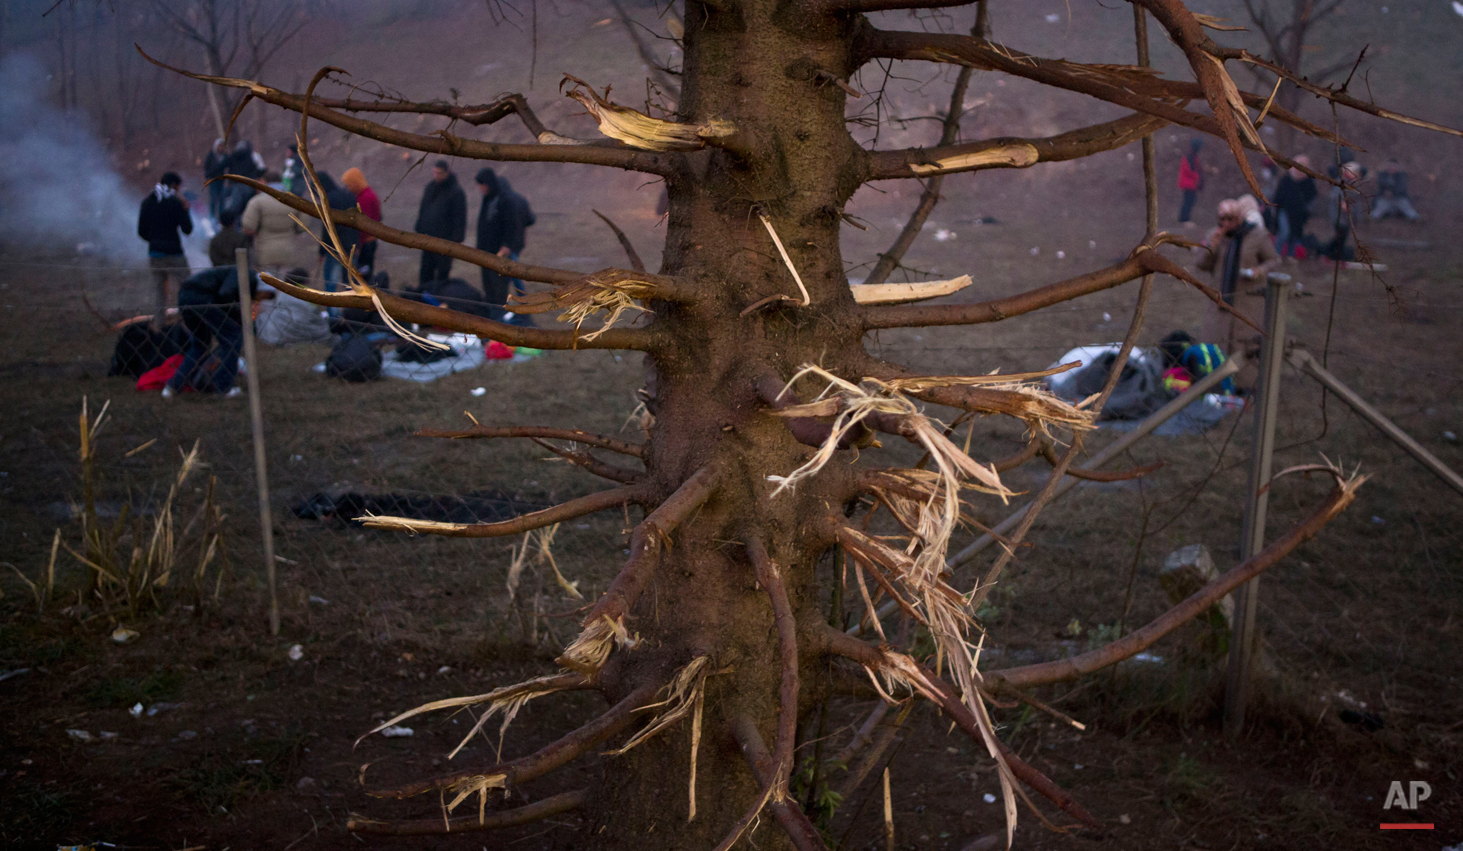  In this photo made on Thursday, Nov. 5, 2015, migrants prepare to spend a night in the open air, near a tree whose branches were cut for firewood, in Sentilj, Slovenia, near the border with Austria. (AP Photo/Darko Bandic) 